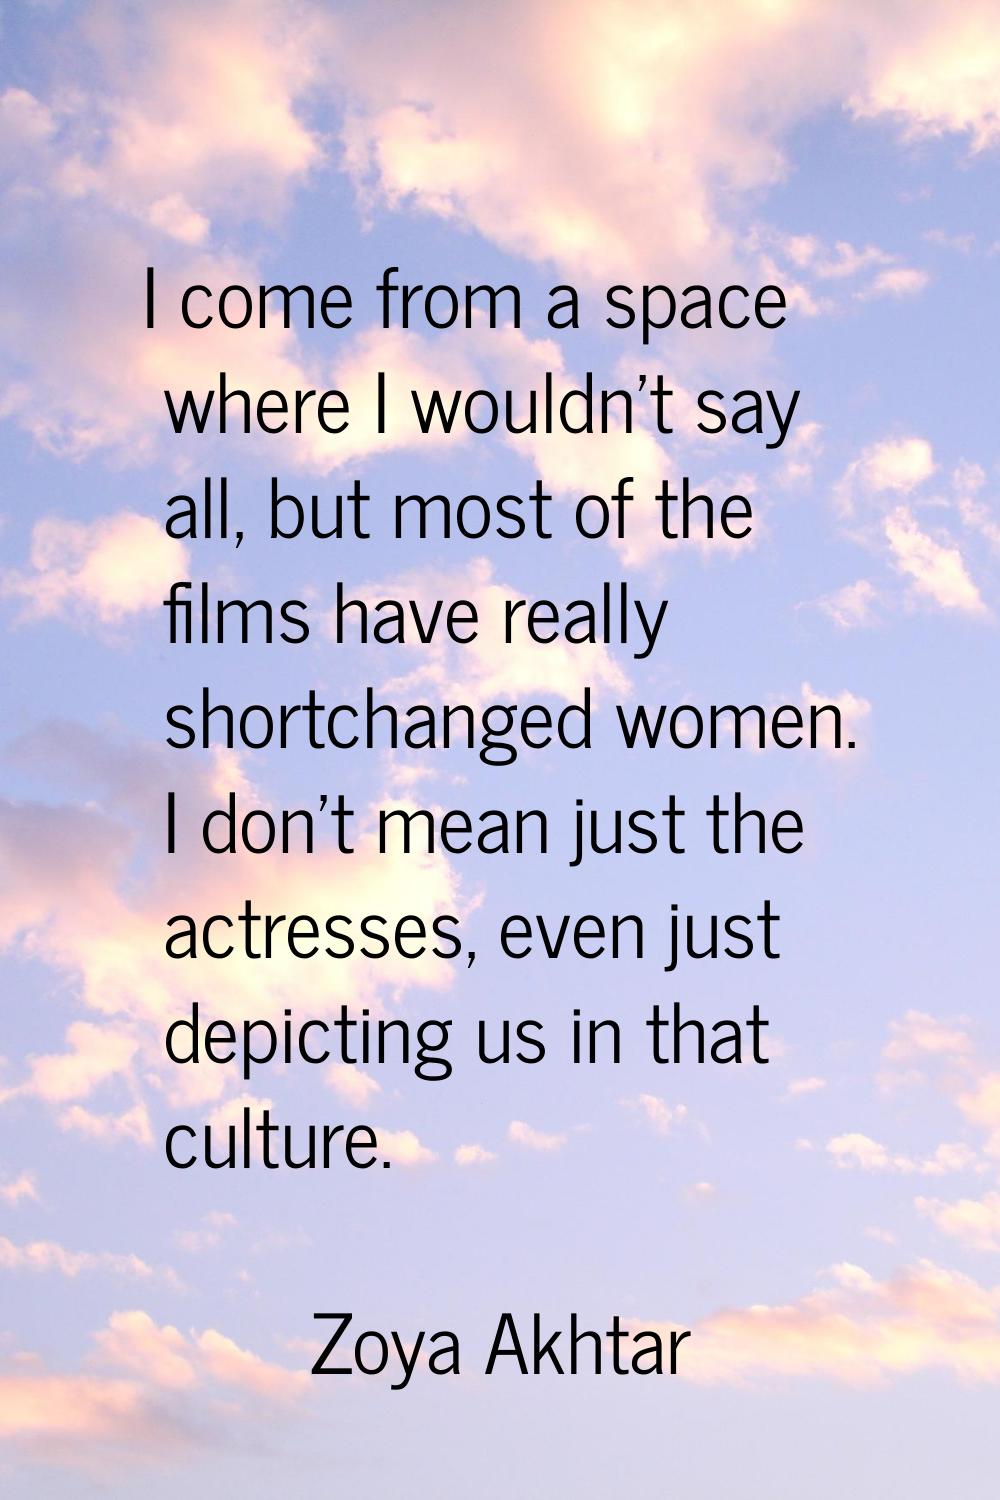 I come from a space where I wouldn't say all, but most of the films have really shortchanged women.